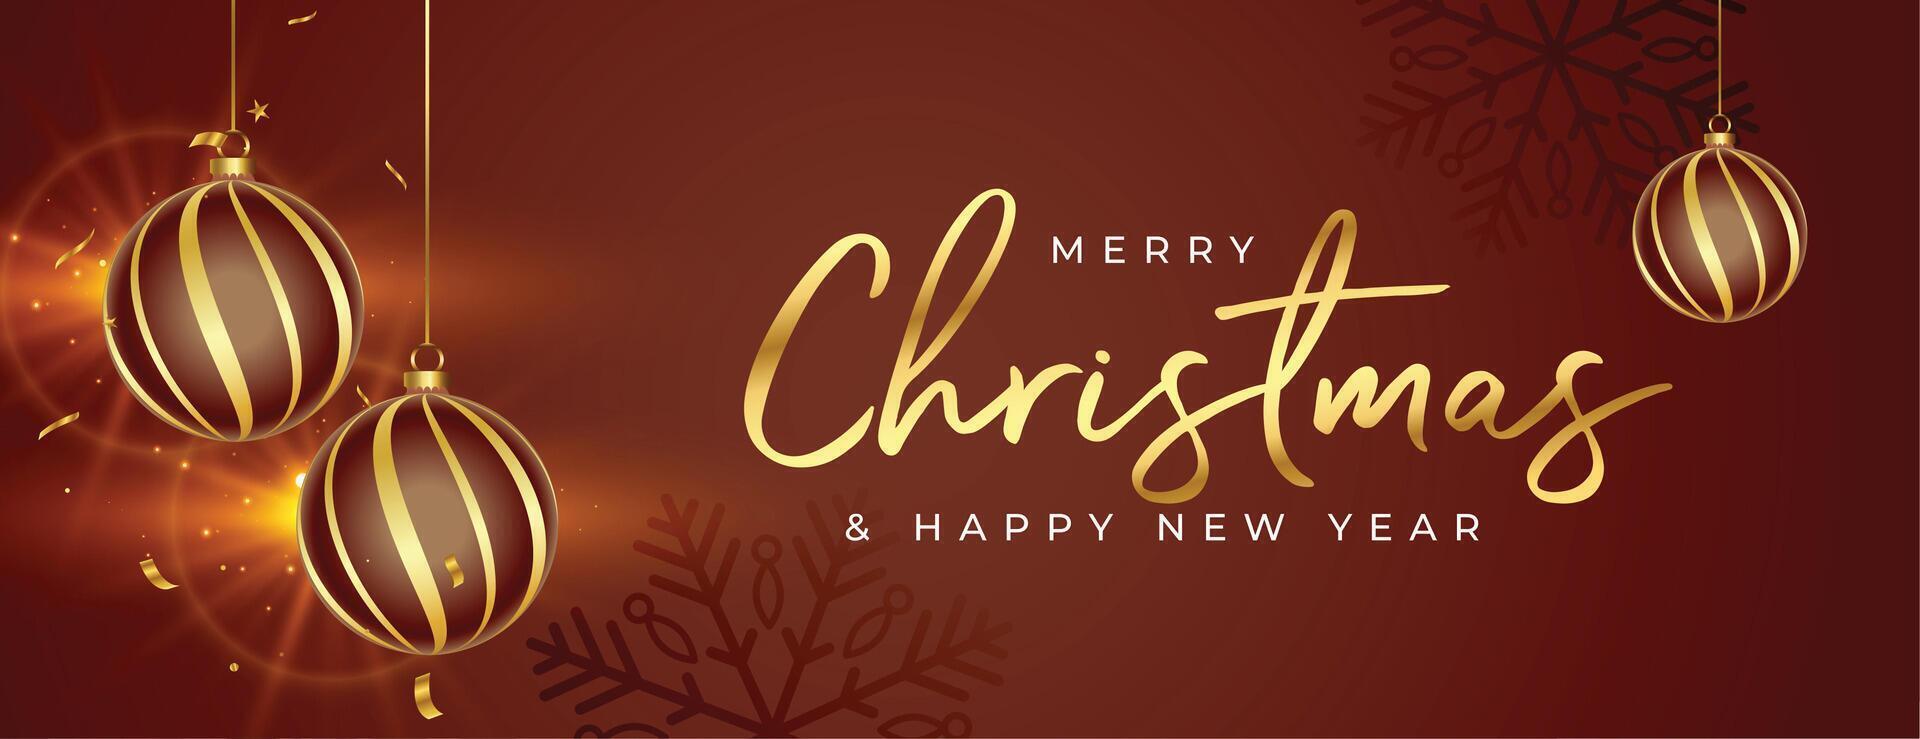 christmas and new year holiday festival banner in beautiful brown and golden color vector